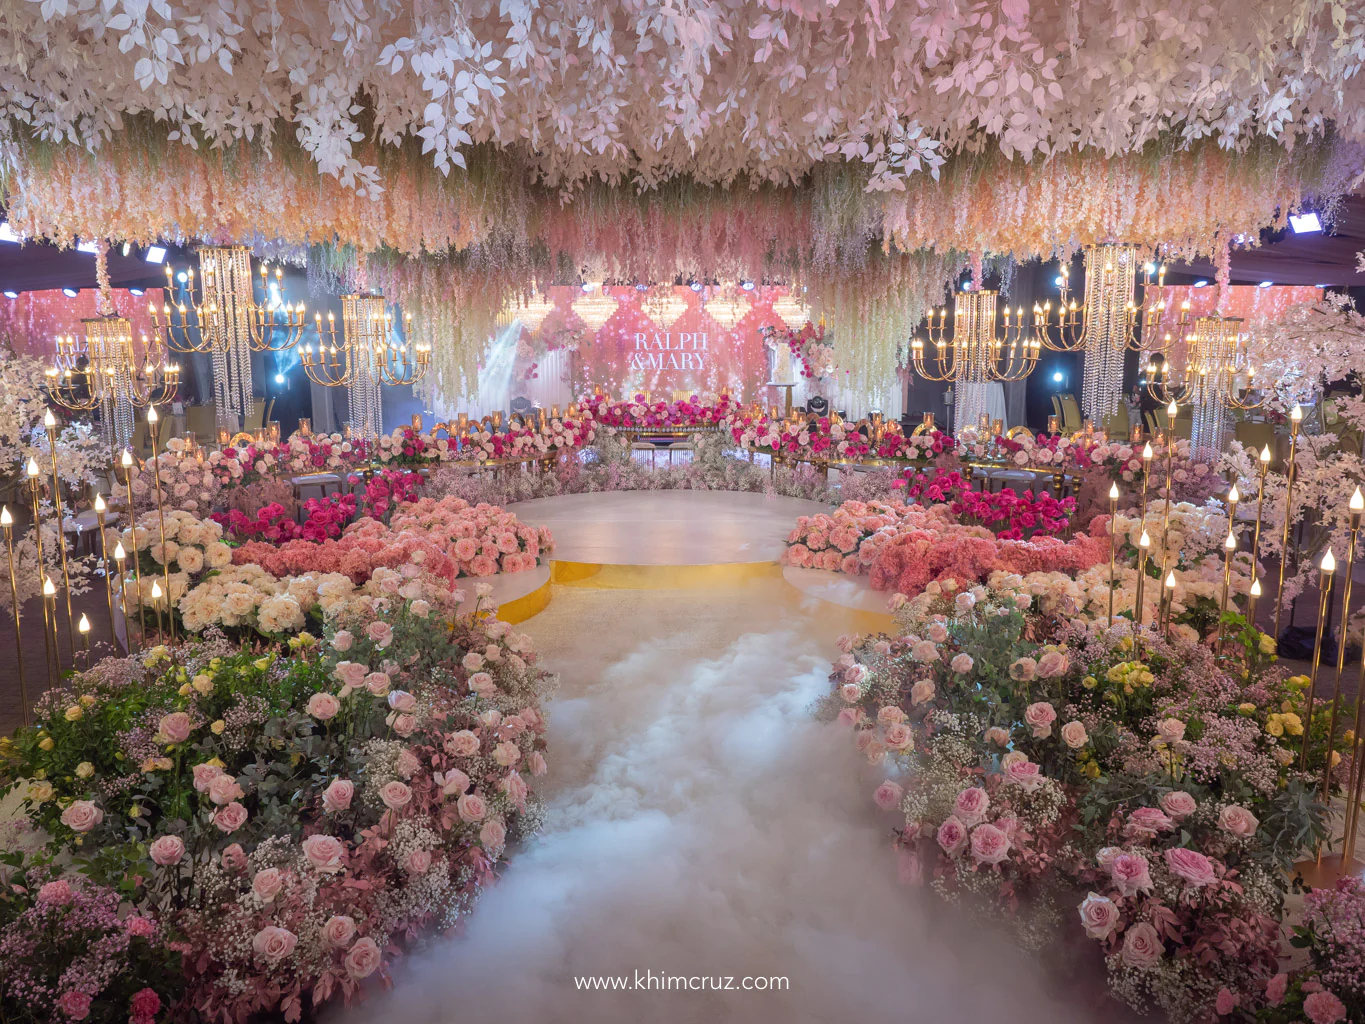 a dreamy cascade of pink hues for the wedding of Ralph & Mary by event designer Khim Cruz